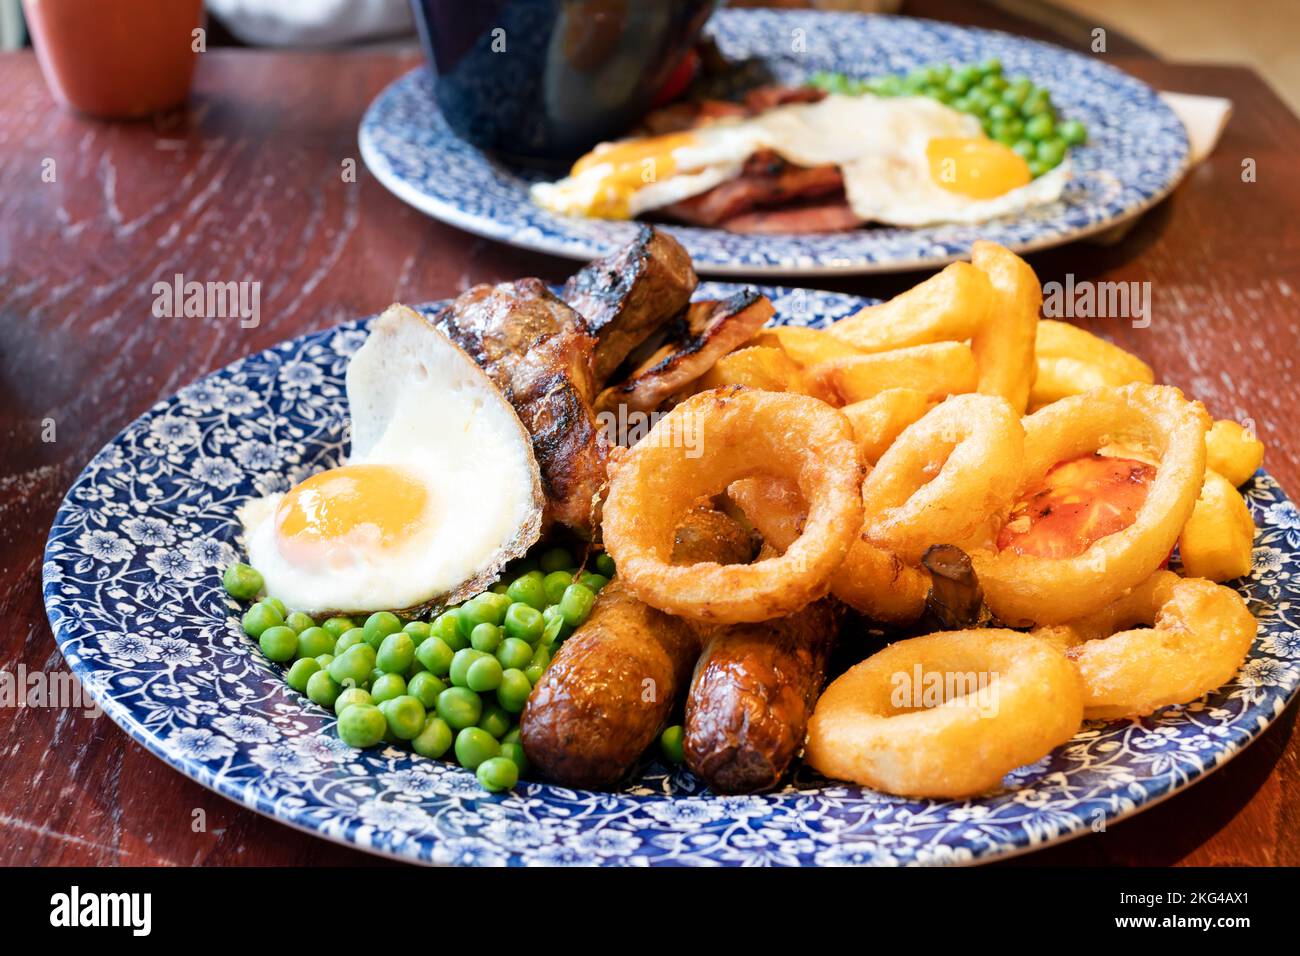 A JD Wetherspoons large mixed grill meal served with onion rings and a fried egg. The value for money meal is on a pub table in a Wetherspoons pub Stock Photo